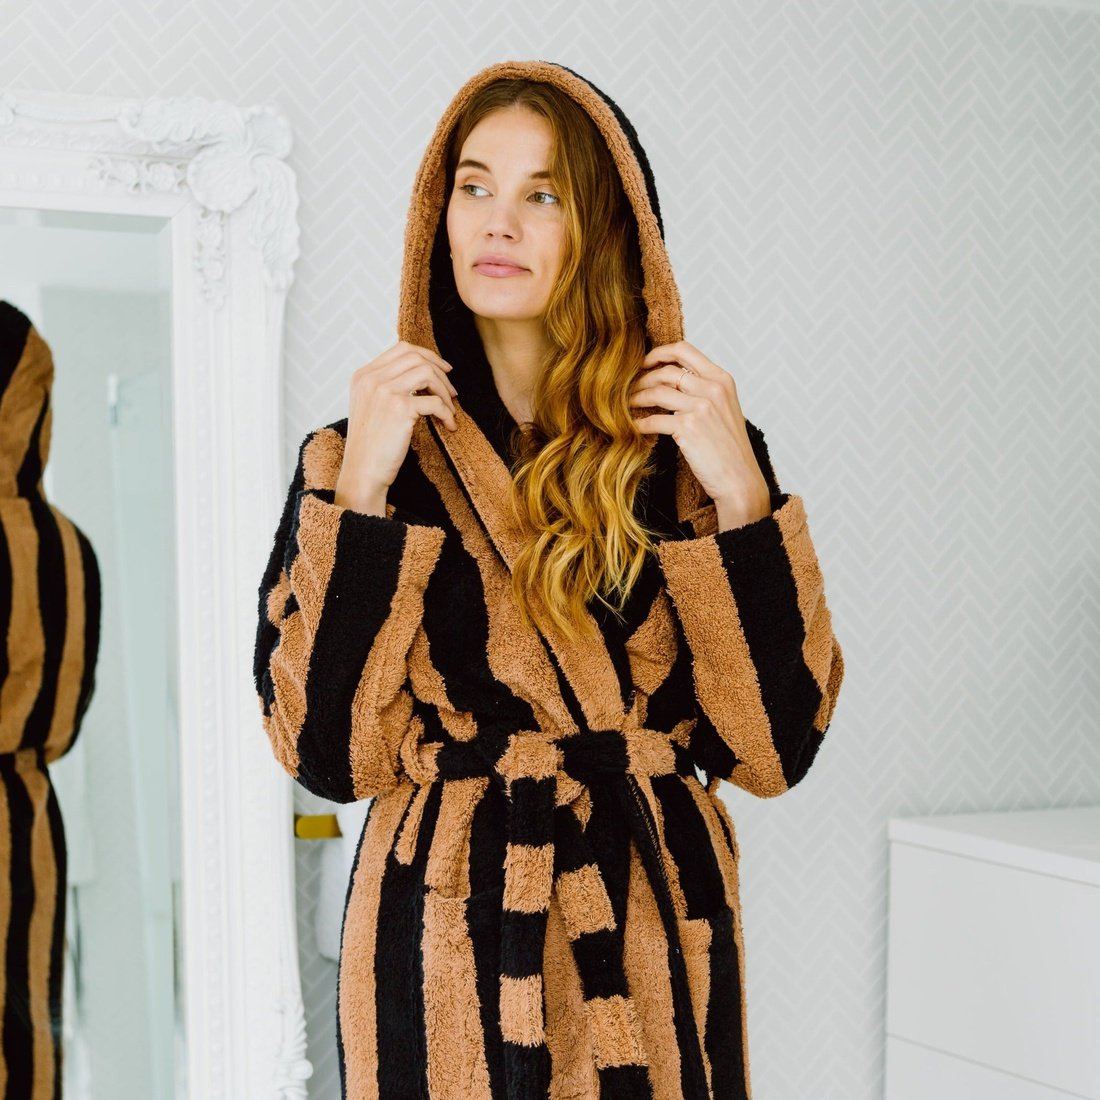 Fleece Hooded Long Dressing Gown | M&S Collection | M&S